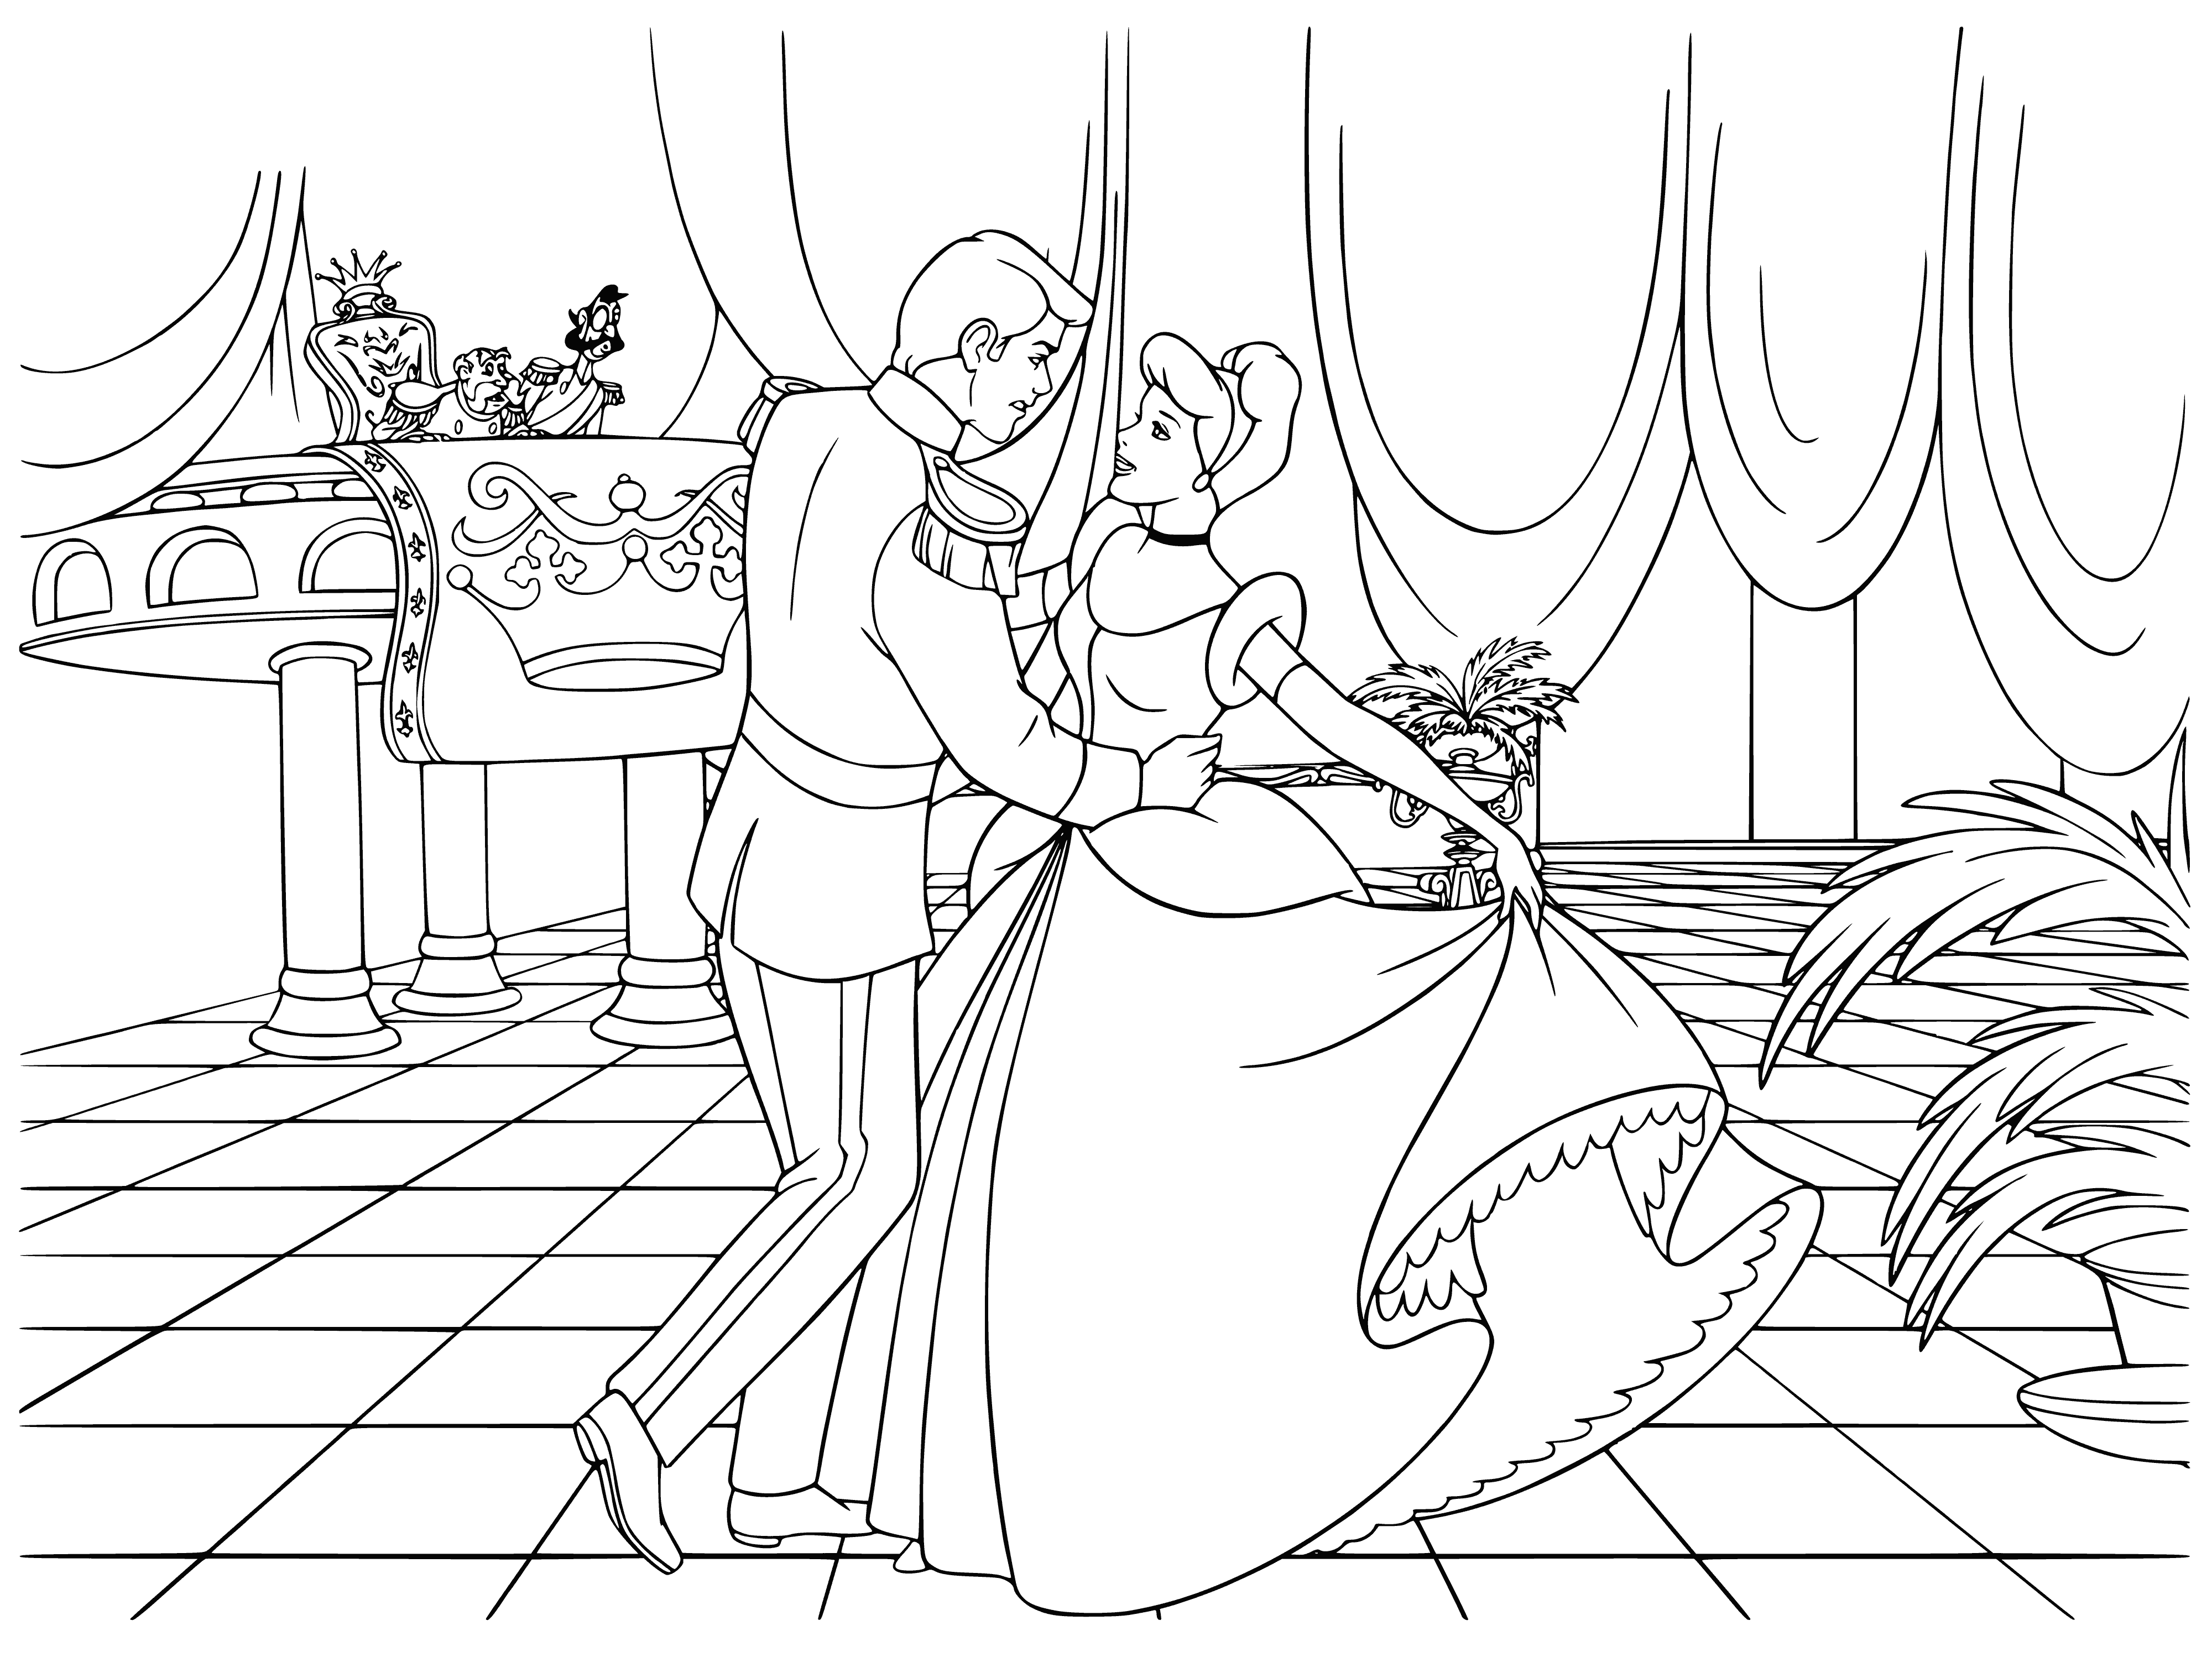 coloring page: Cinderella & prince dancing in a ballroom. She wears white dress, blue sash & shoes; he wears white shirt, vest & pants w/sword at his side.